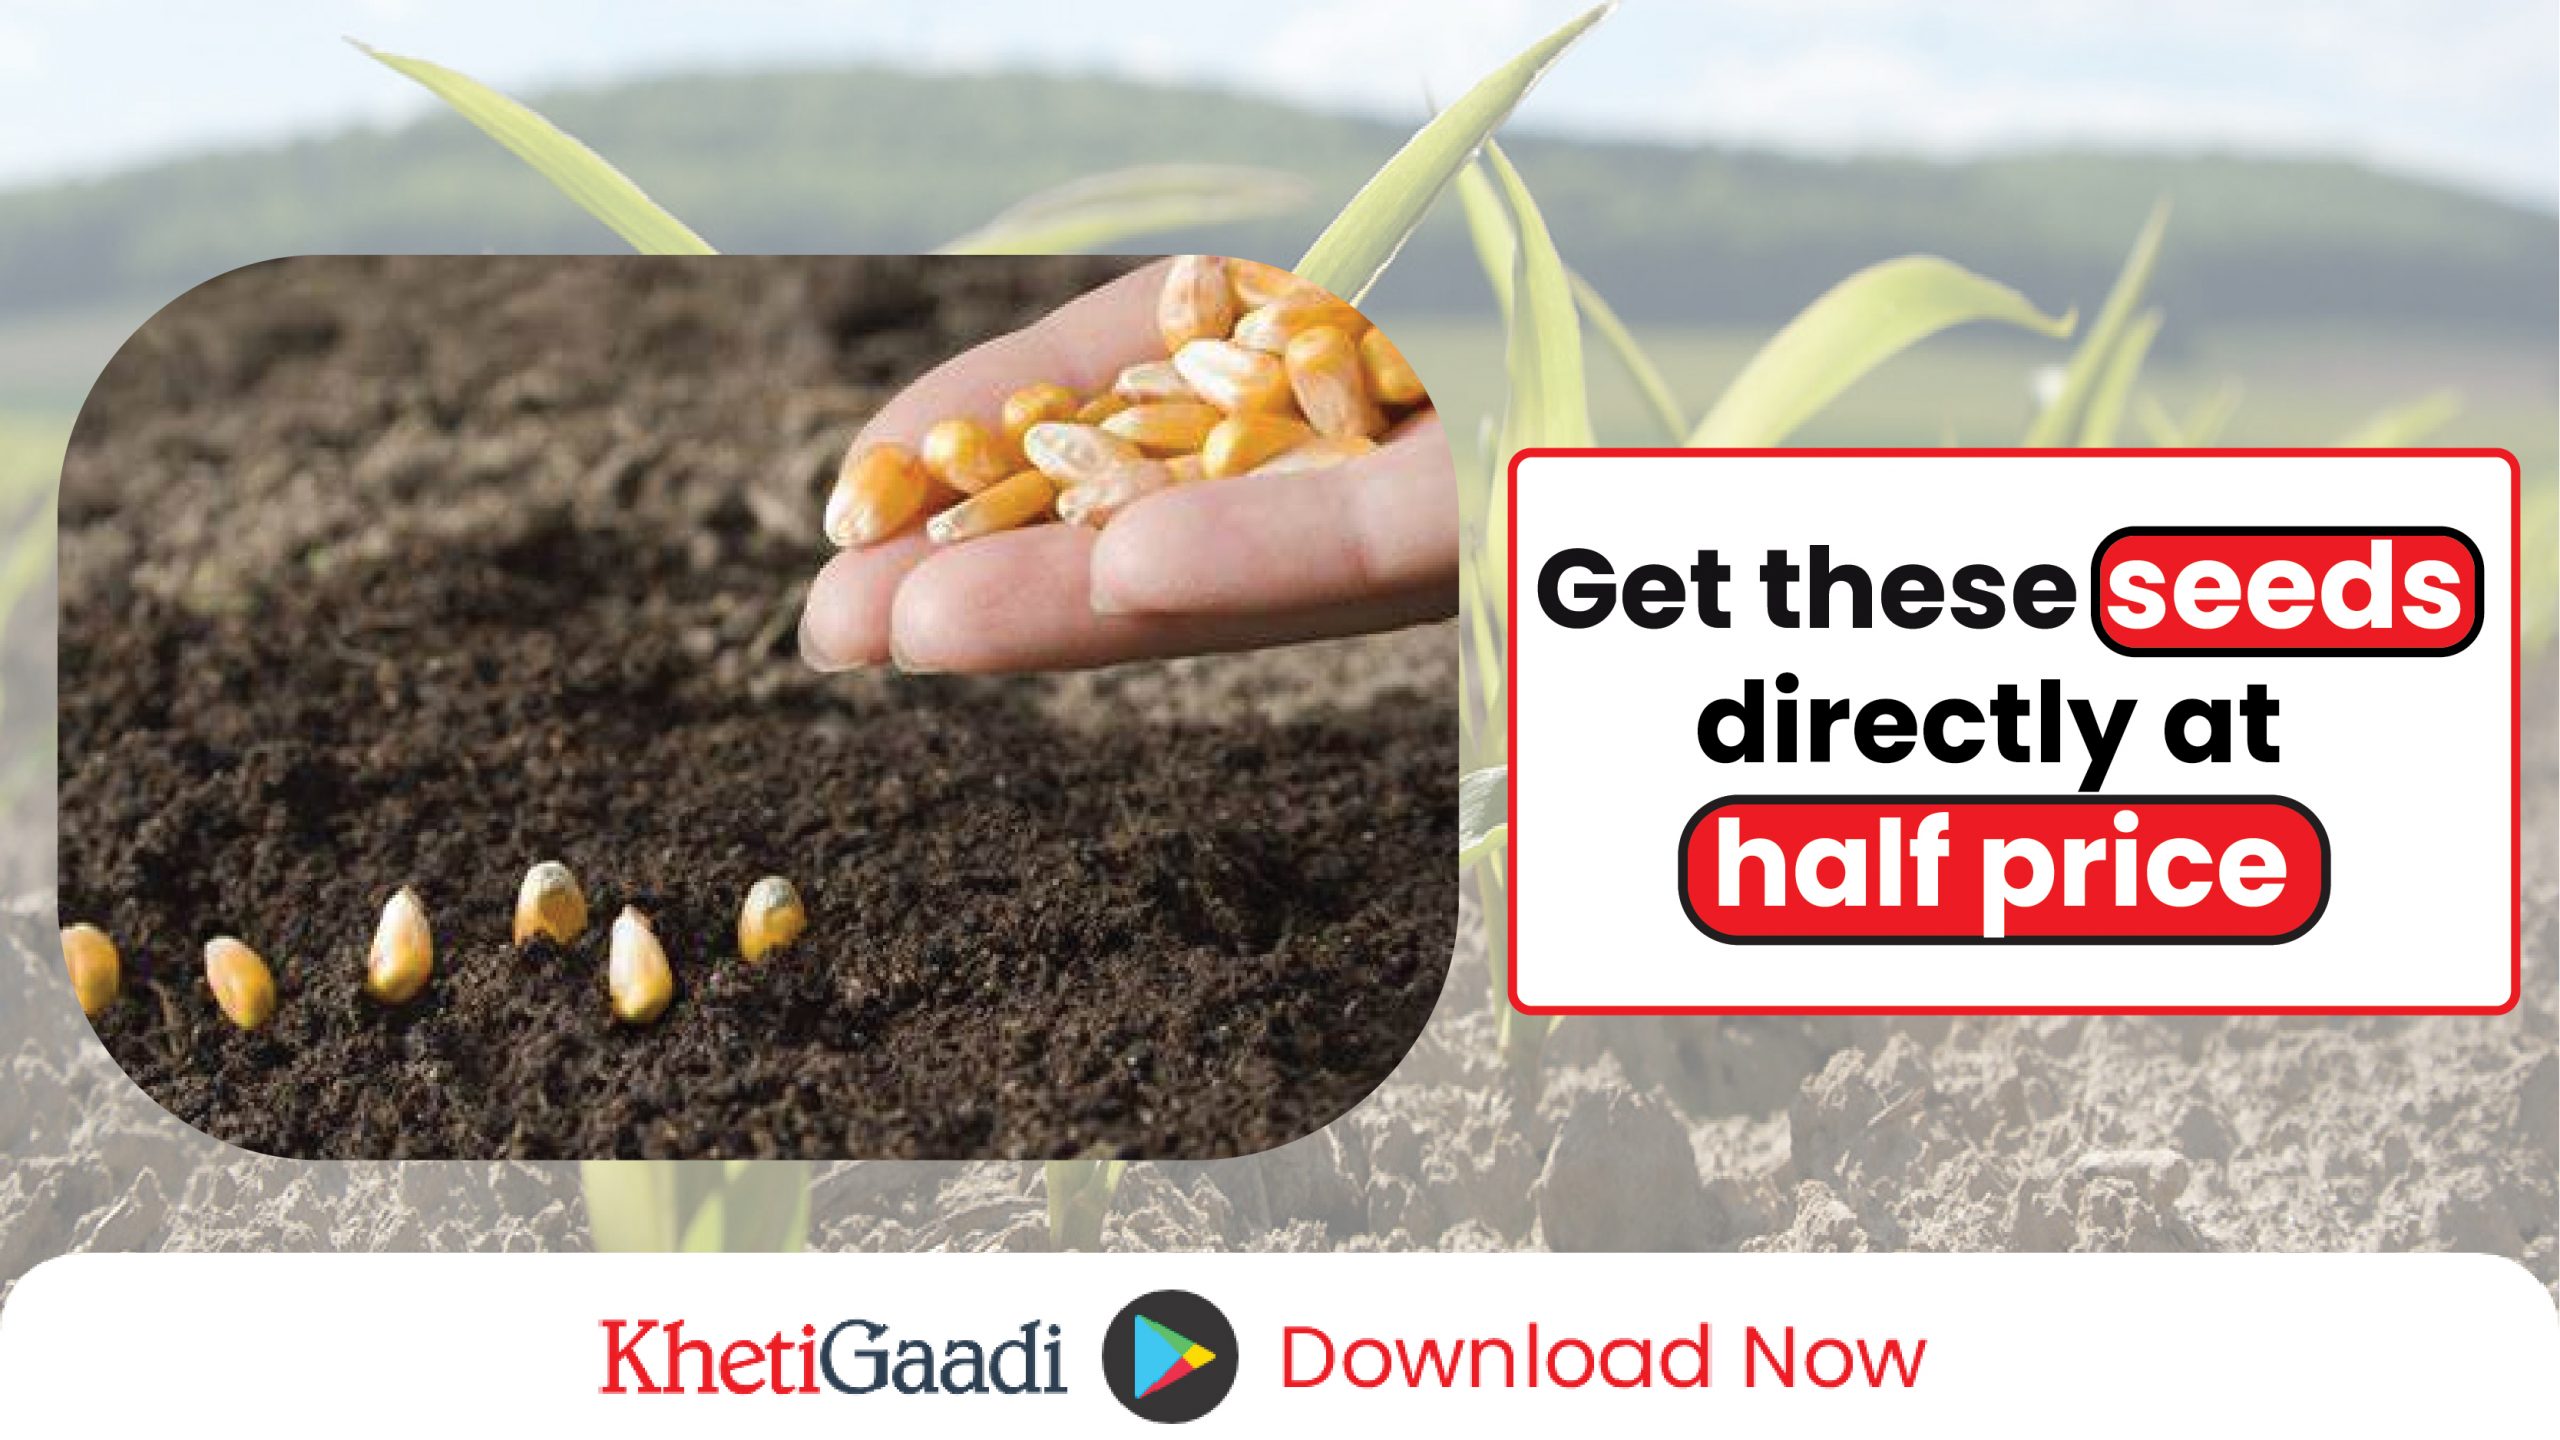 Now get ‘Maize seeds’ directly at half price.